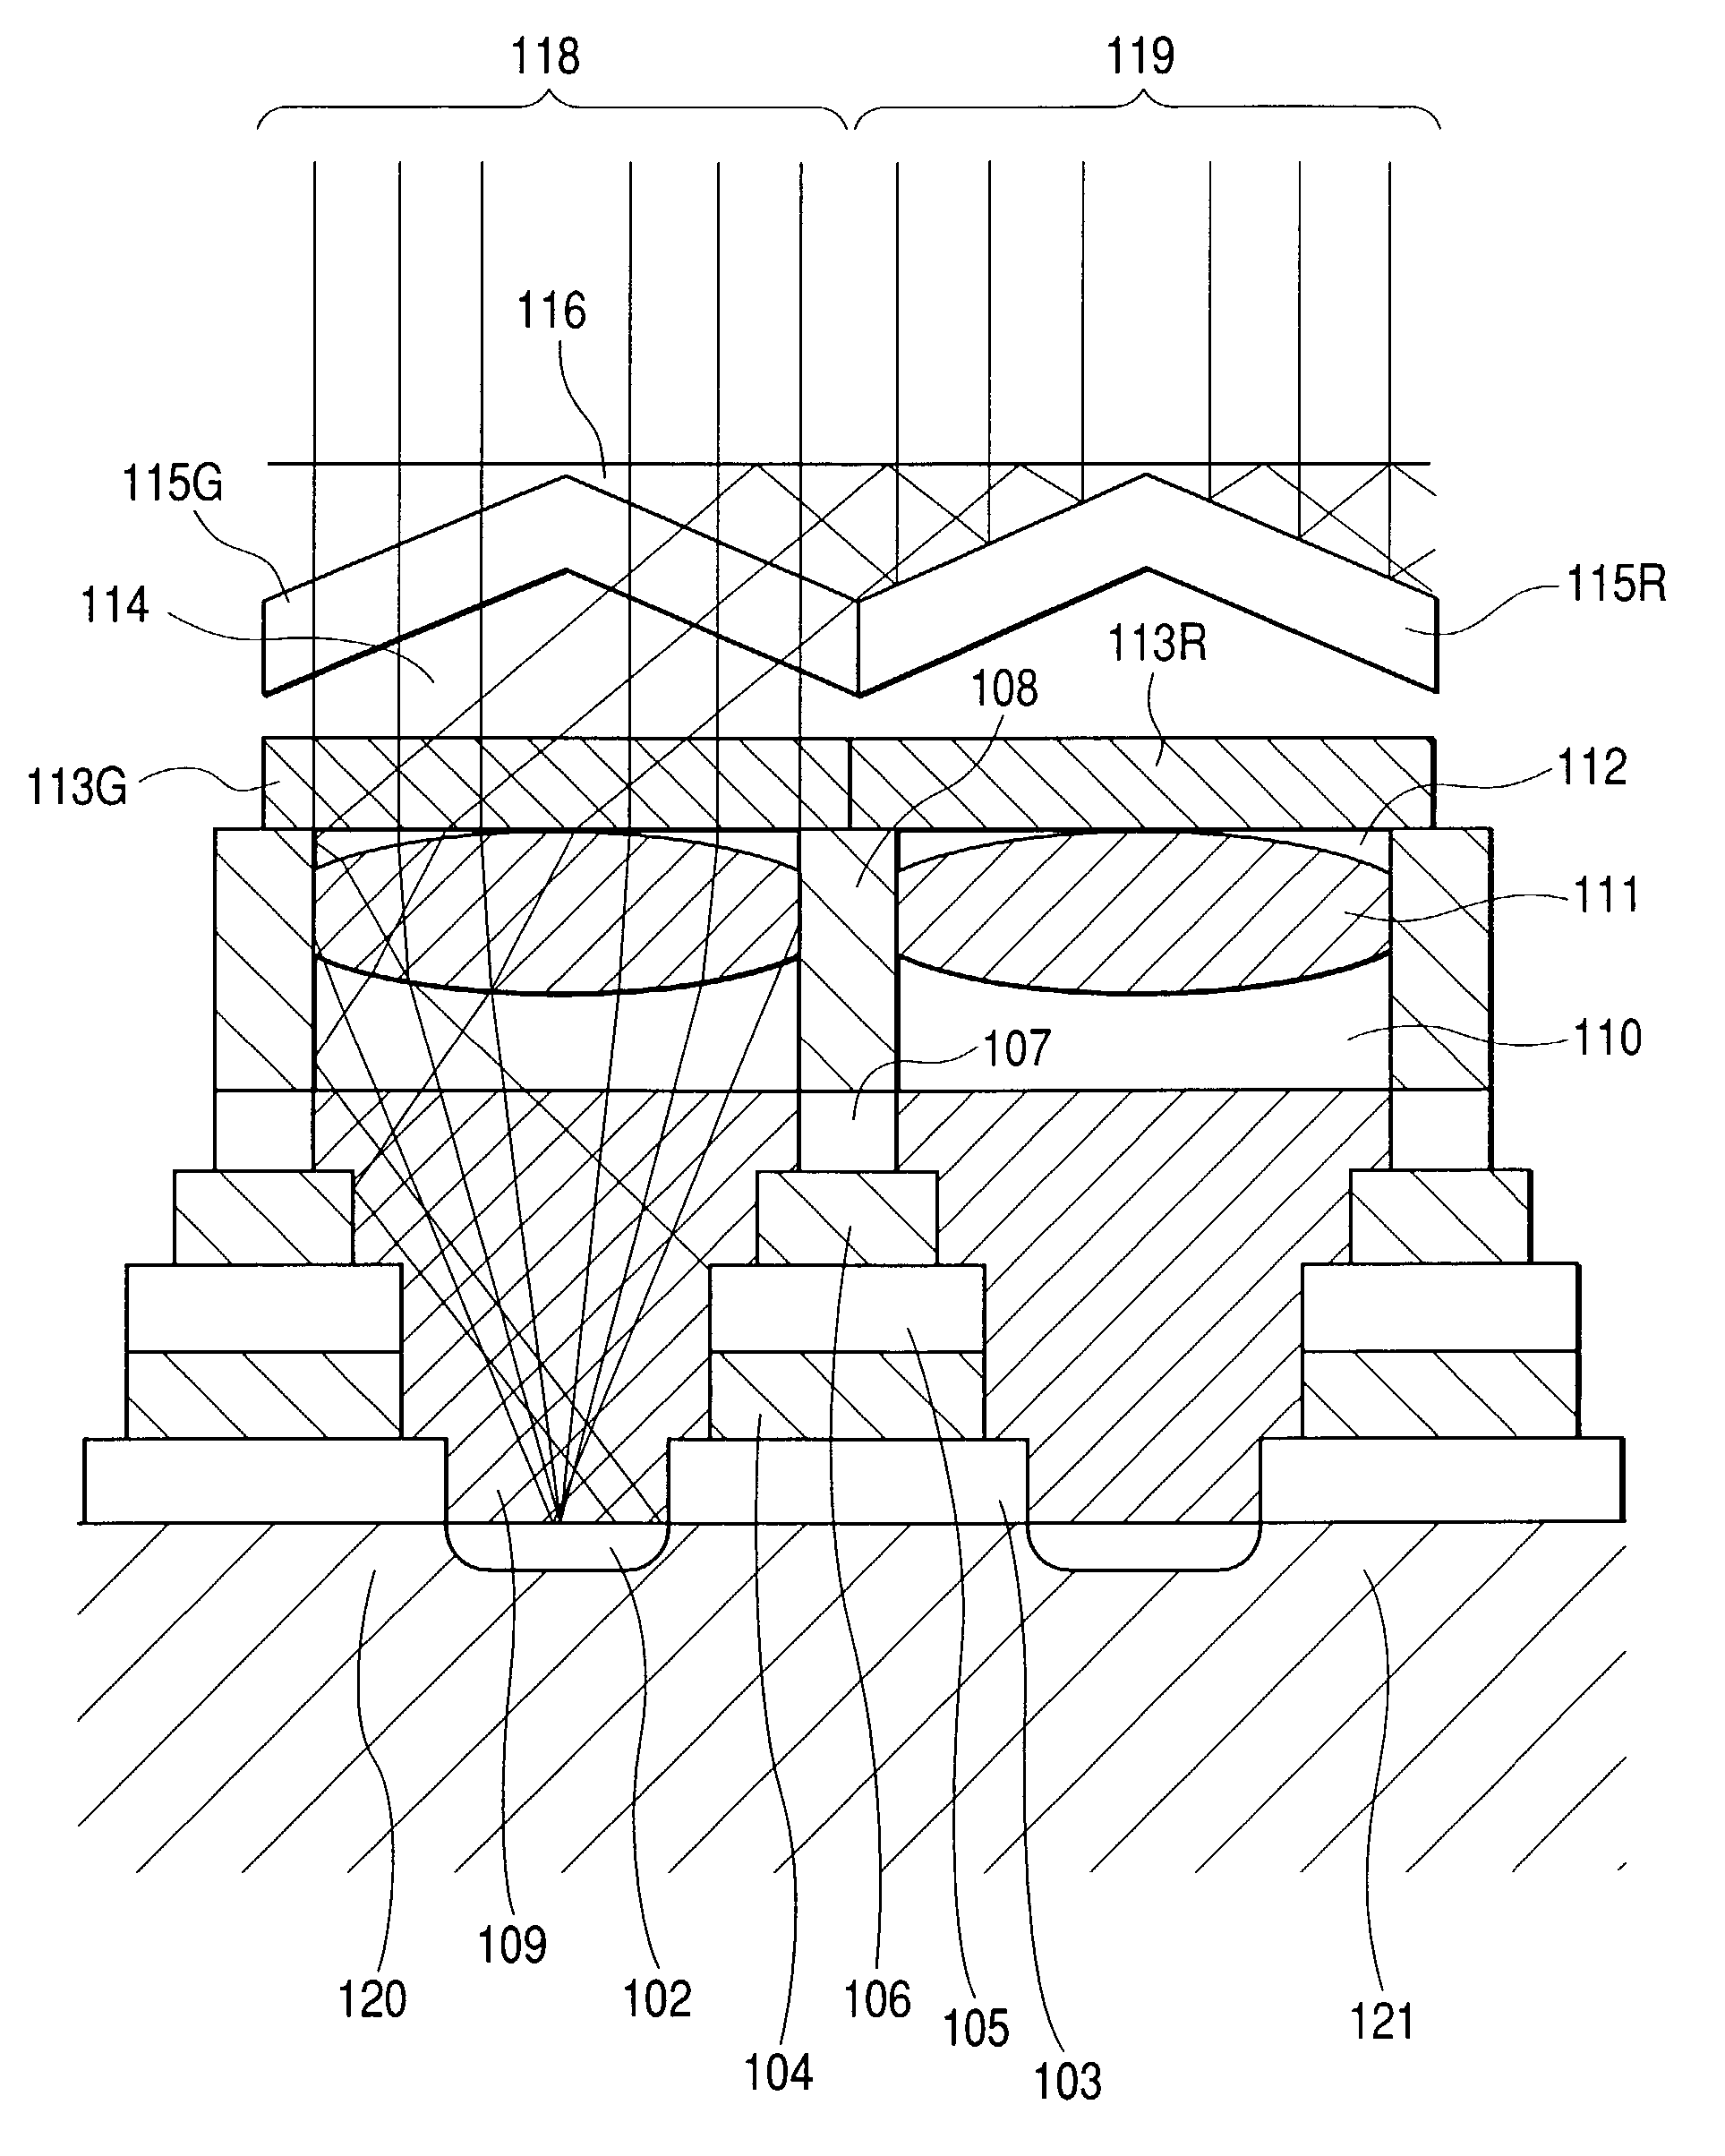 Image pickup apparatus containing light adjustment portion with reflection of a portion of light onto adjacent pixels